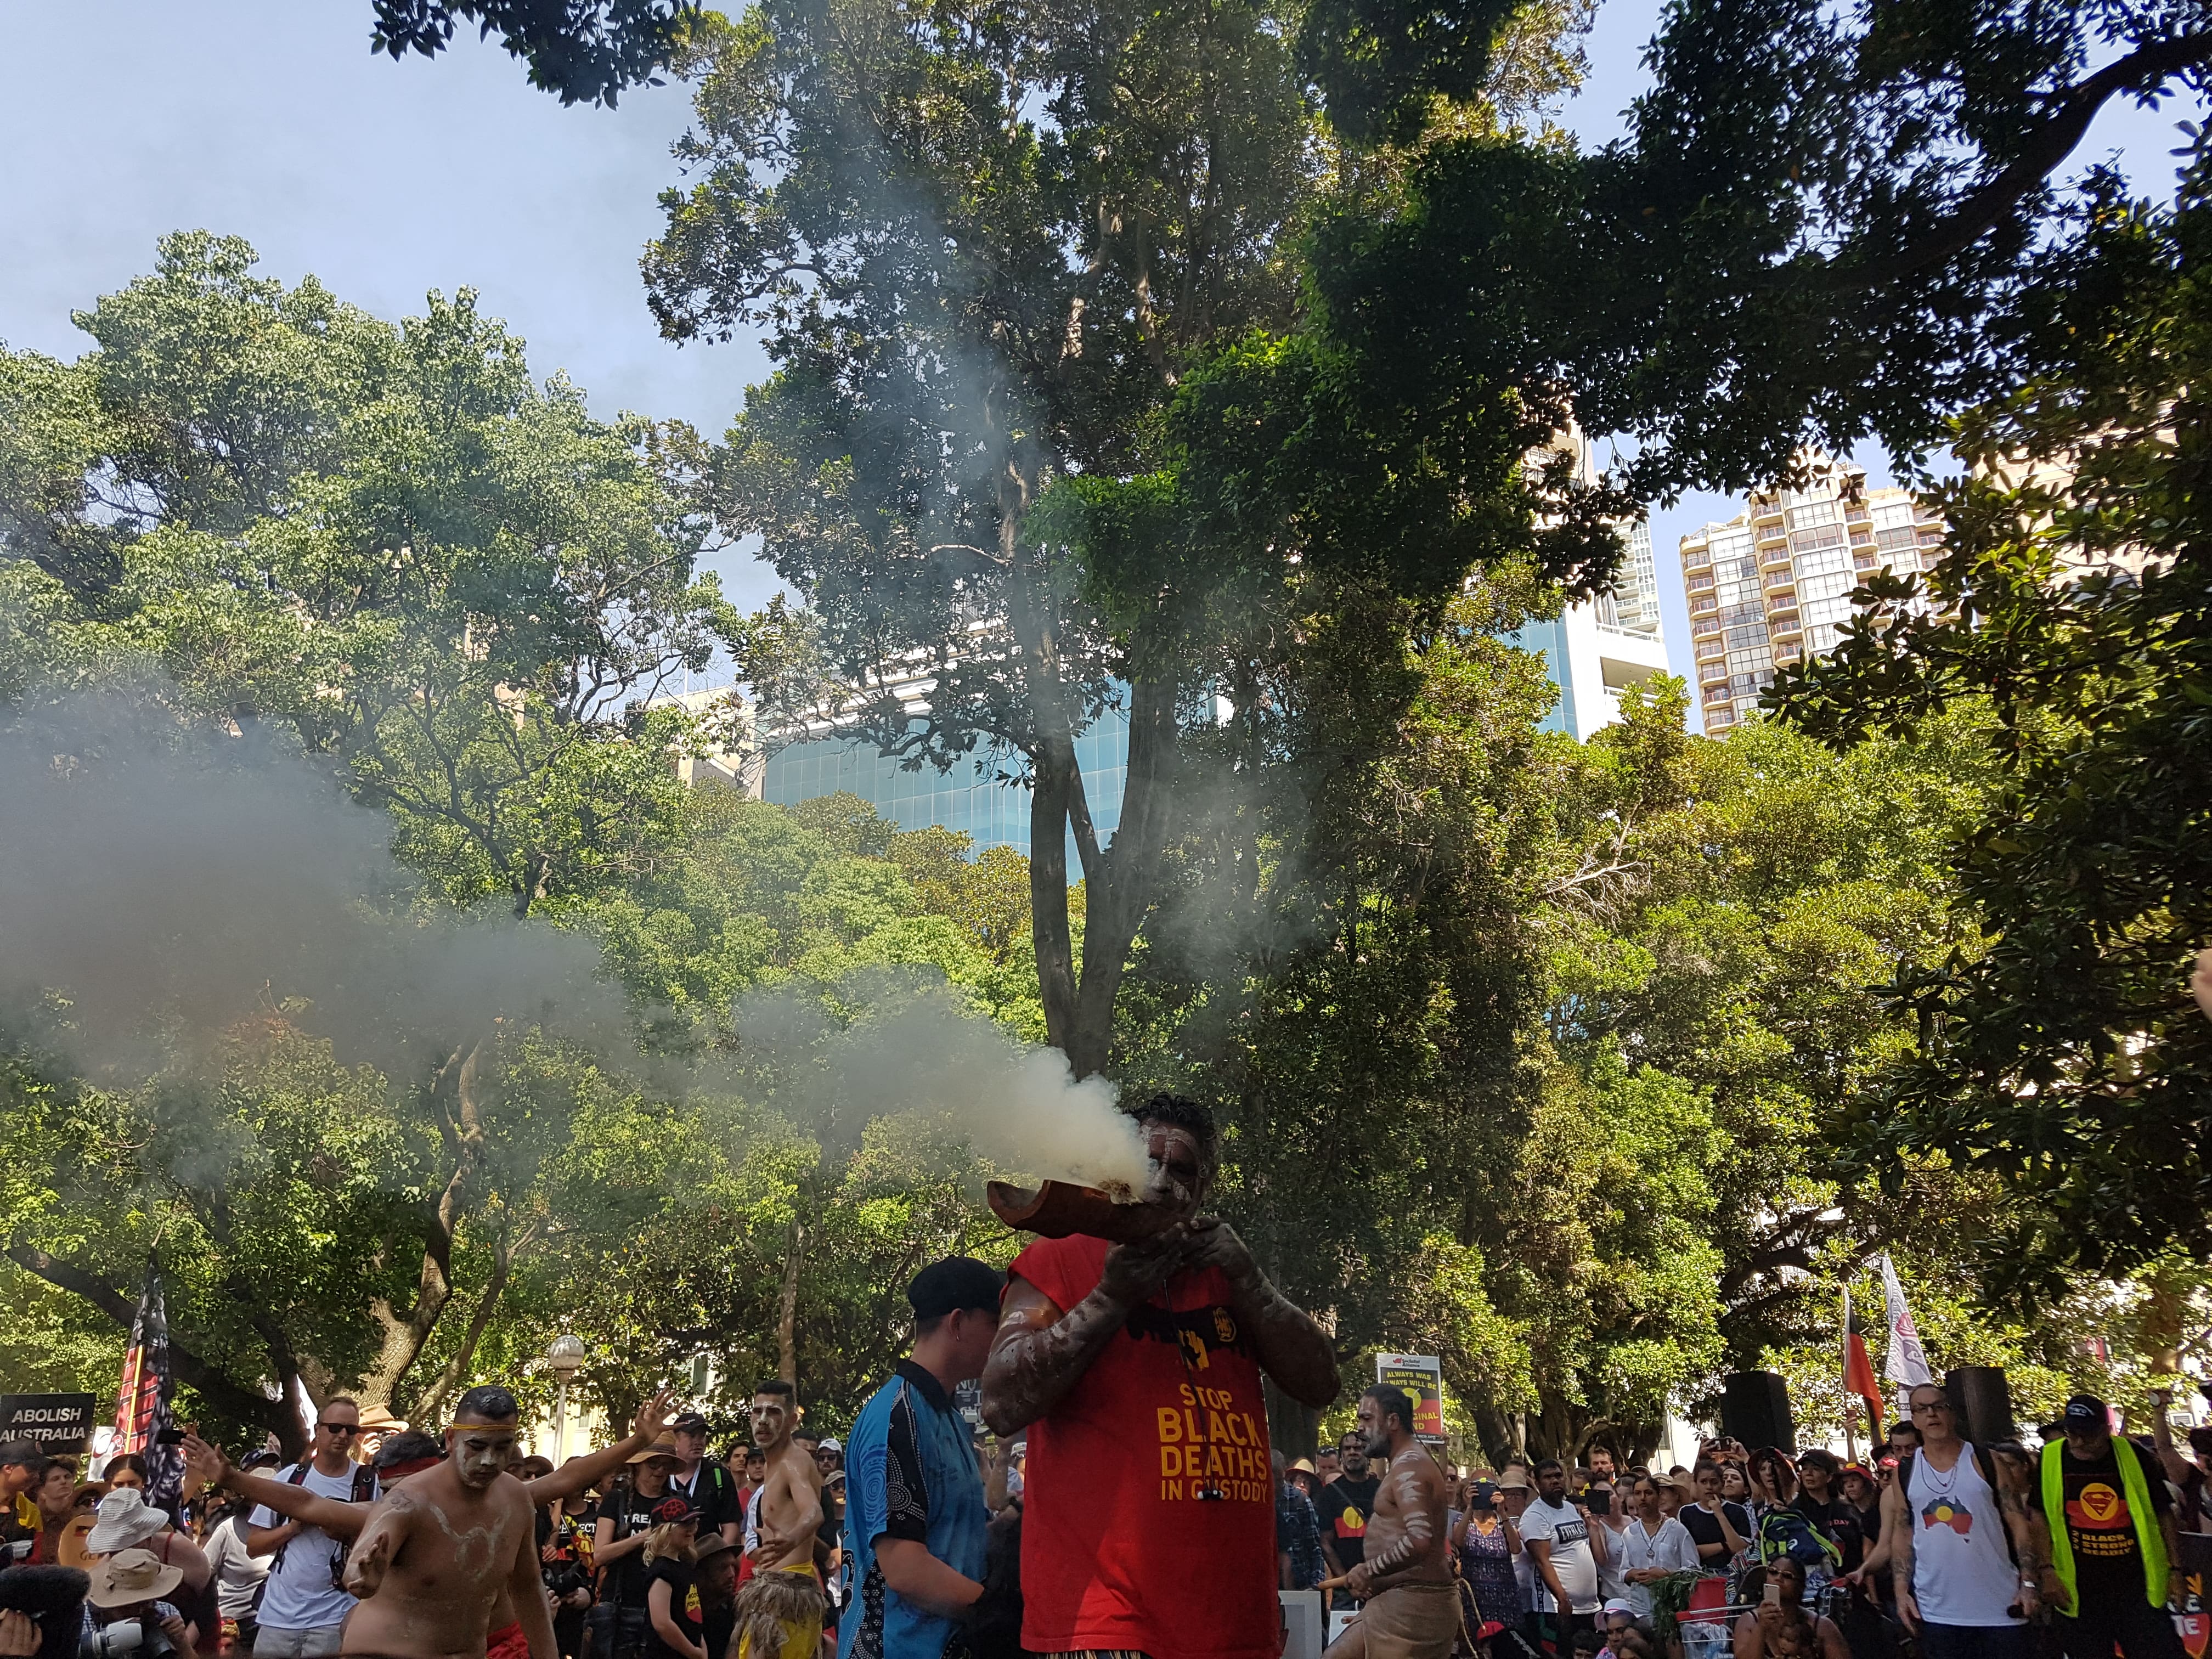 A smoking ceremony takes place after the acknowledgement of country at the Invasion Day 2019 Rally in Sydney.